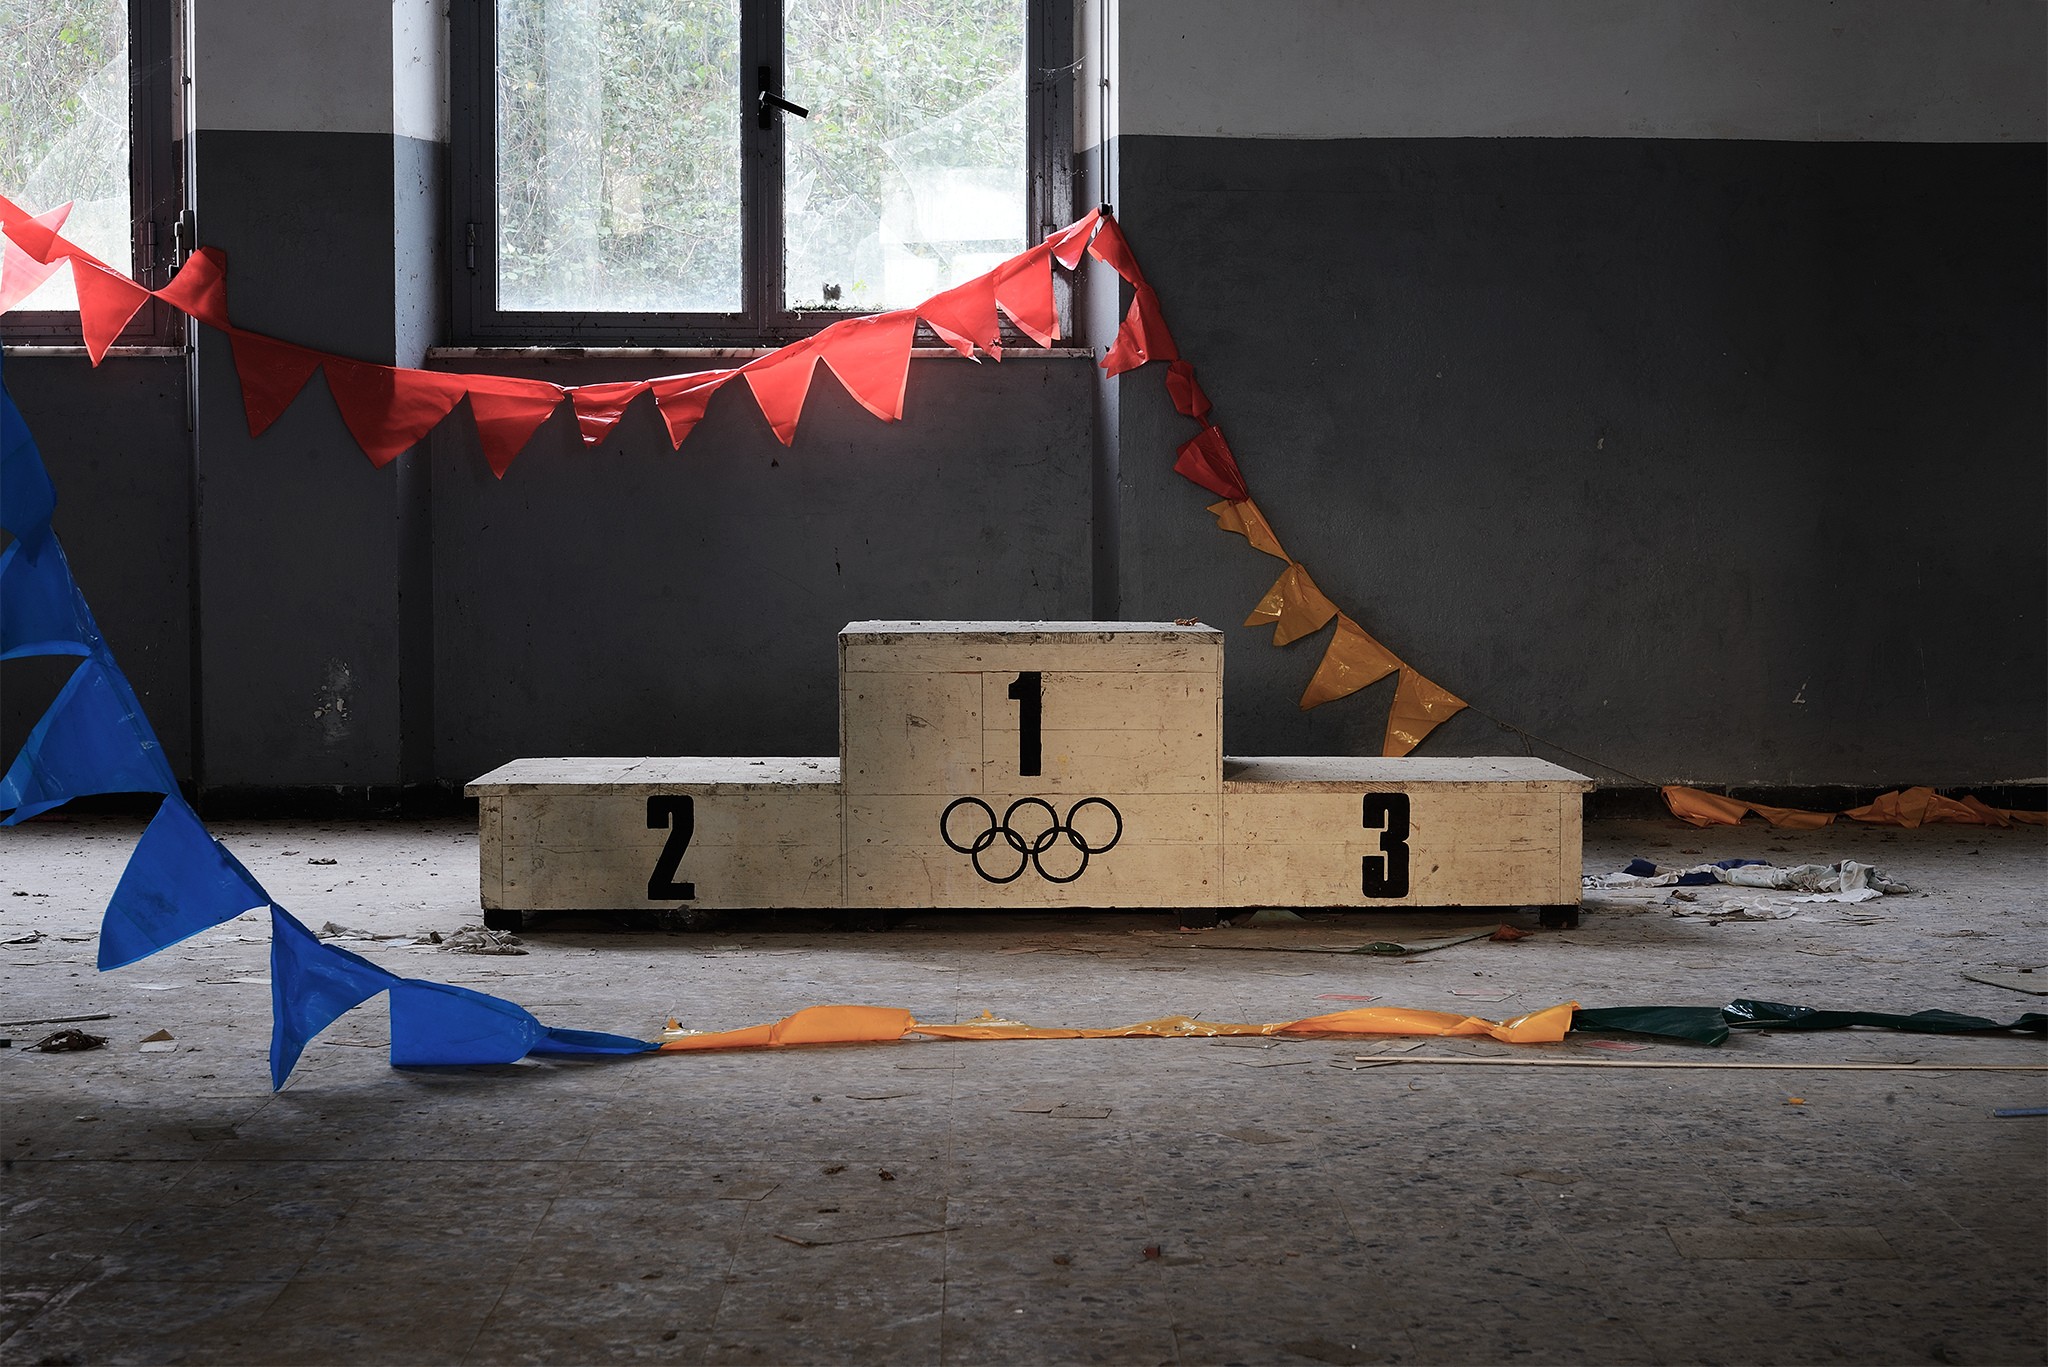 Abandoned Interior Podiums Olympics Flag Window Wall Stages On The Floor 2048x1367